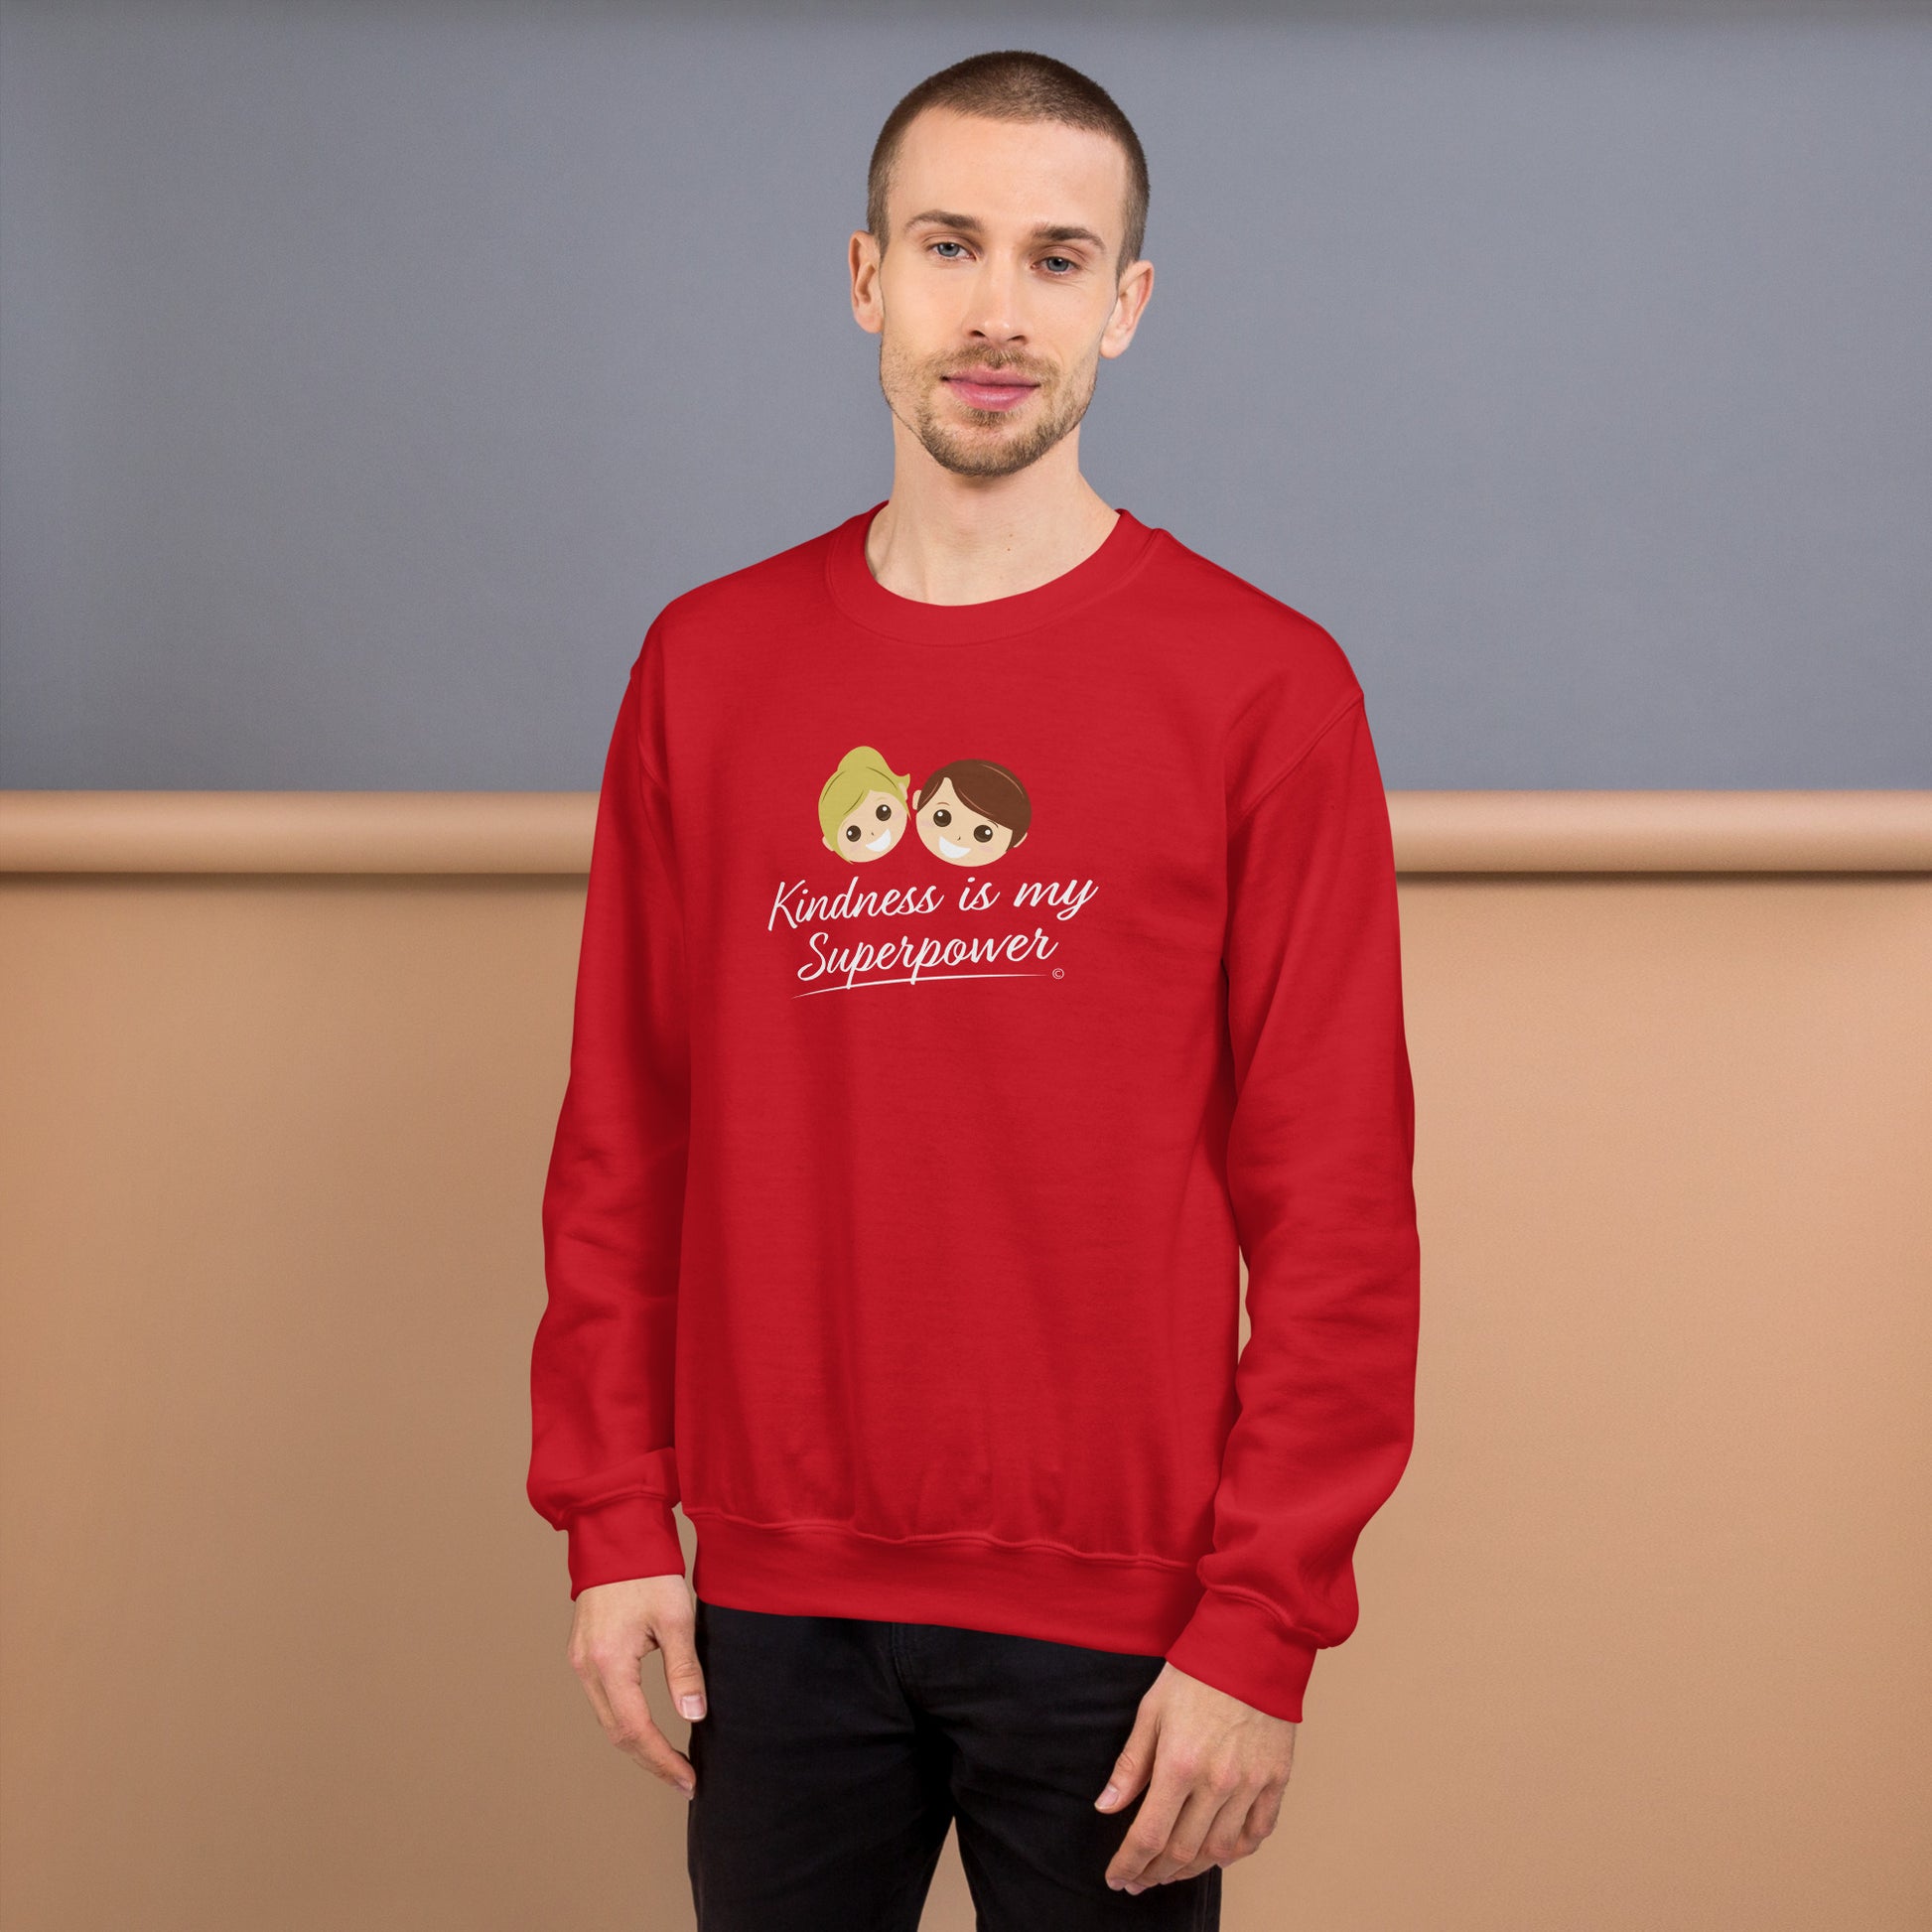 A stylish man confidently modeling a cozy unisex sweatshirt in red, adorned with the empowering quote 'Kindness is my Superpower' in bold lettering.